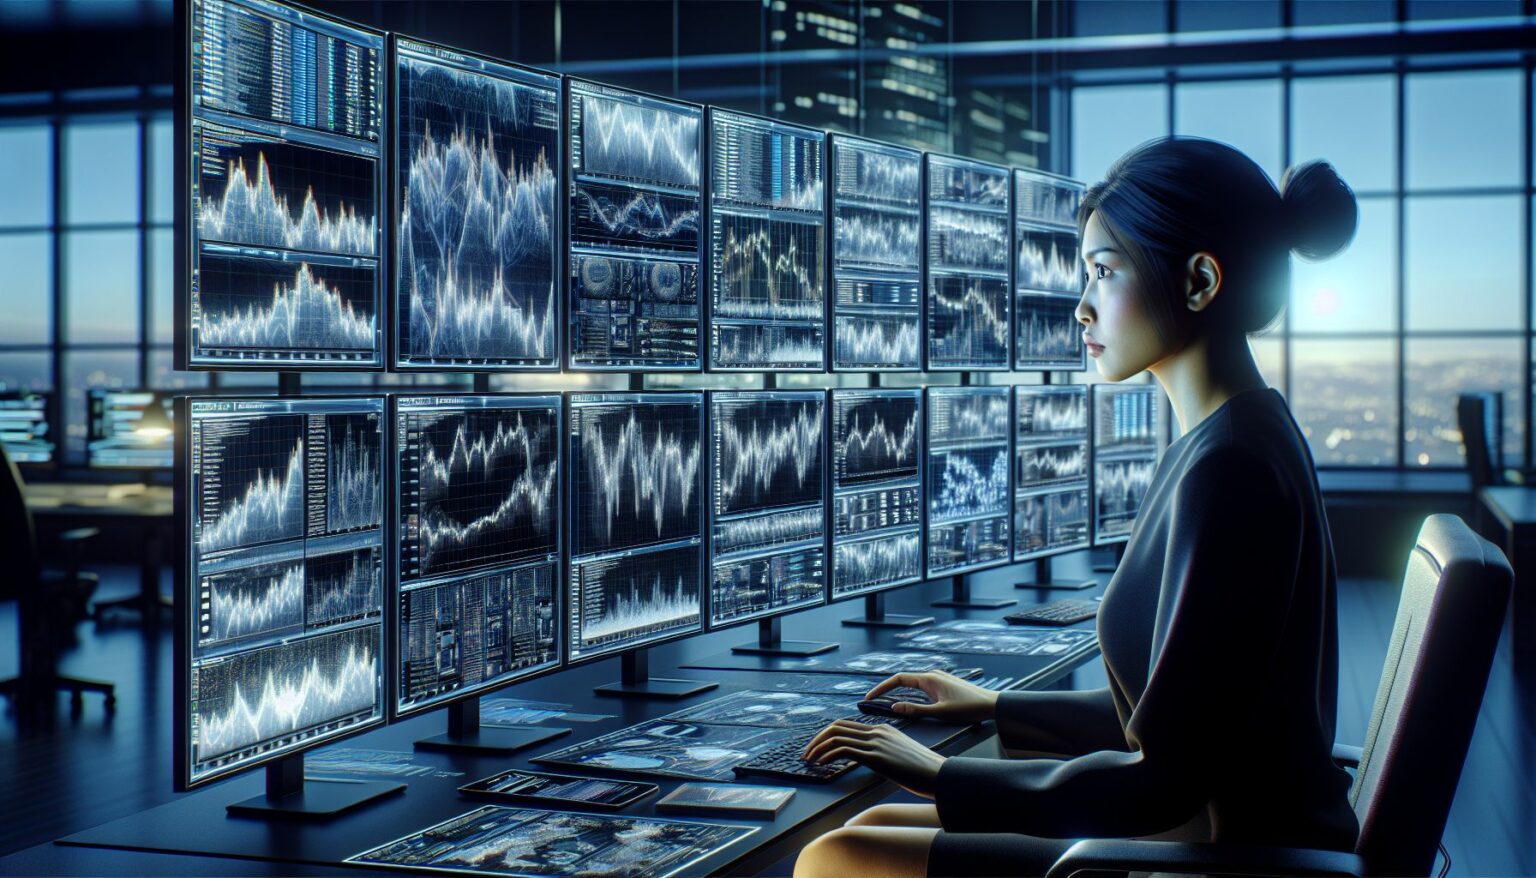 stock trader analyzing charts on multiple screens